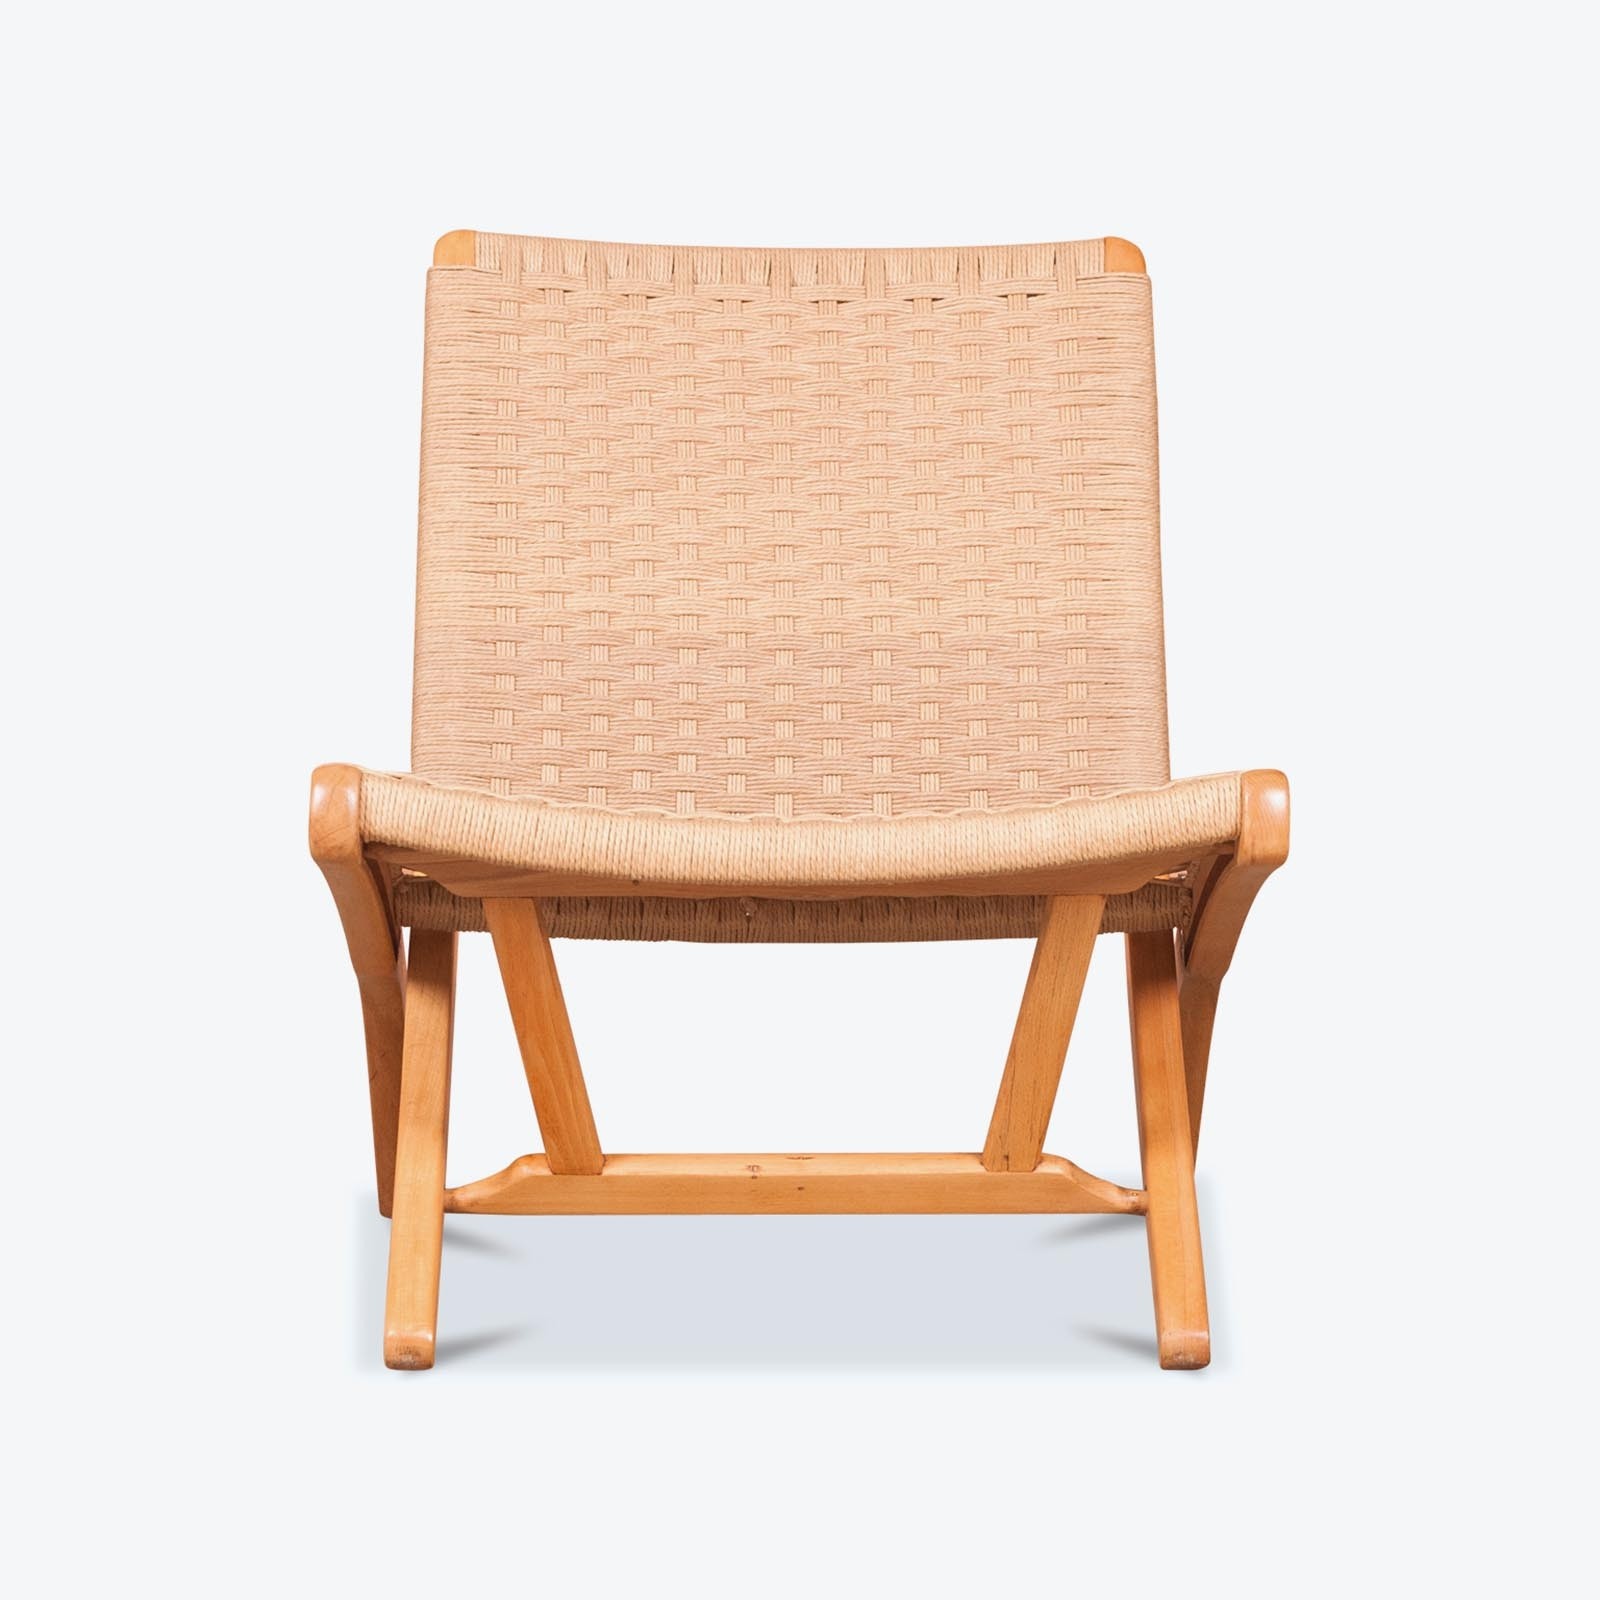 Japanese folding chair in the style of hans wegner with